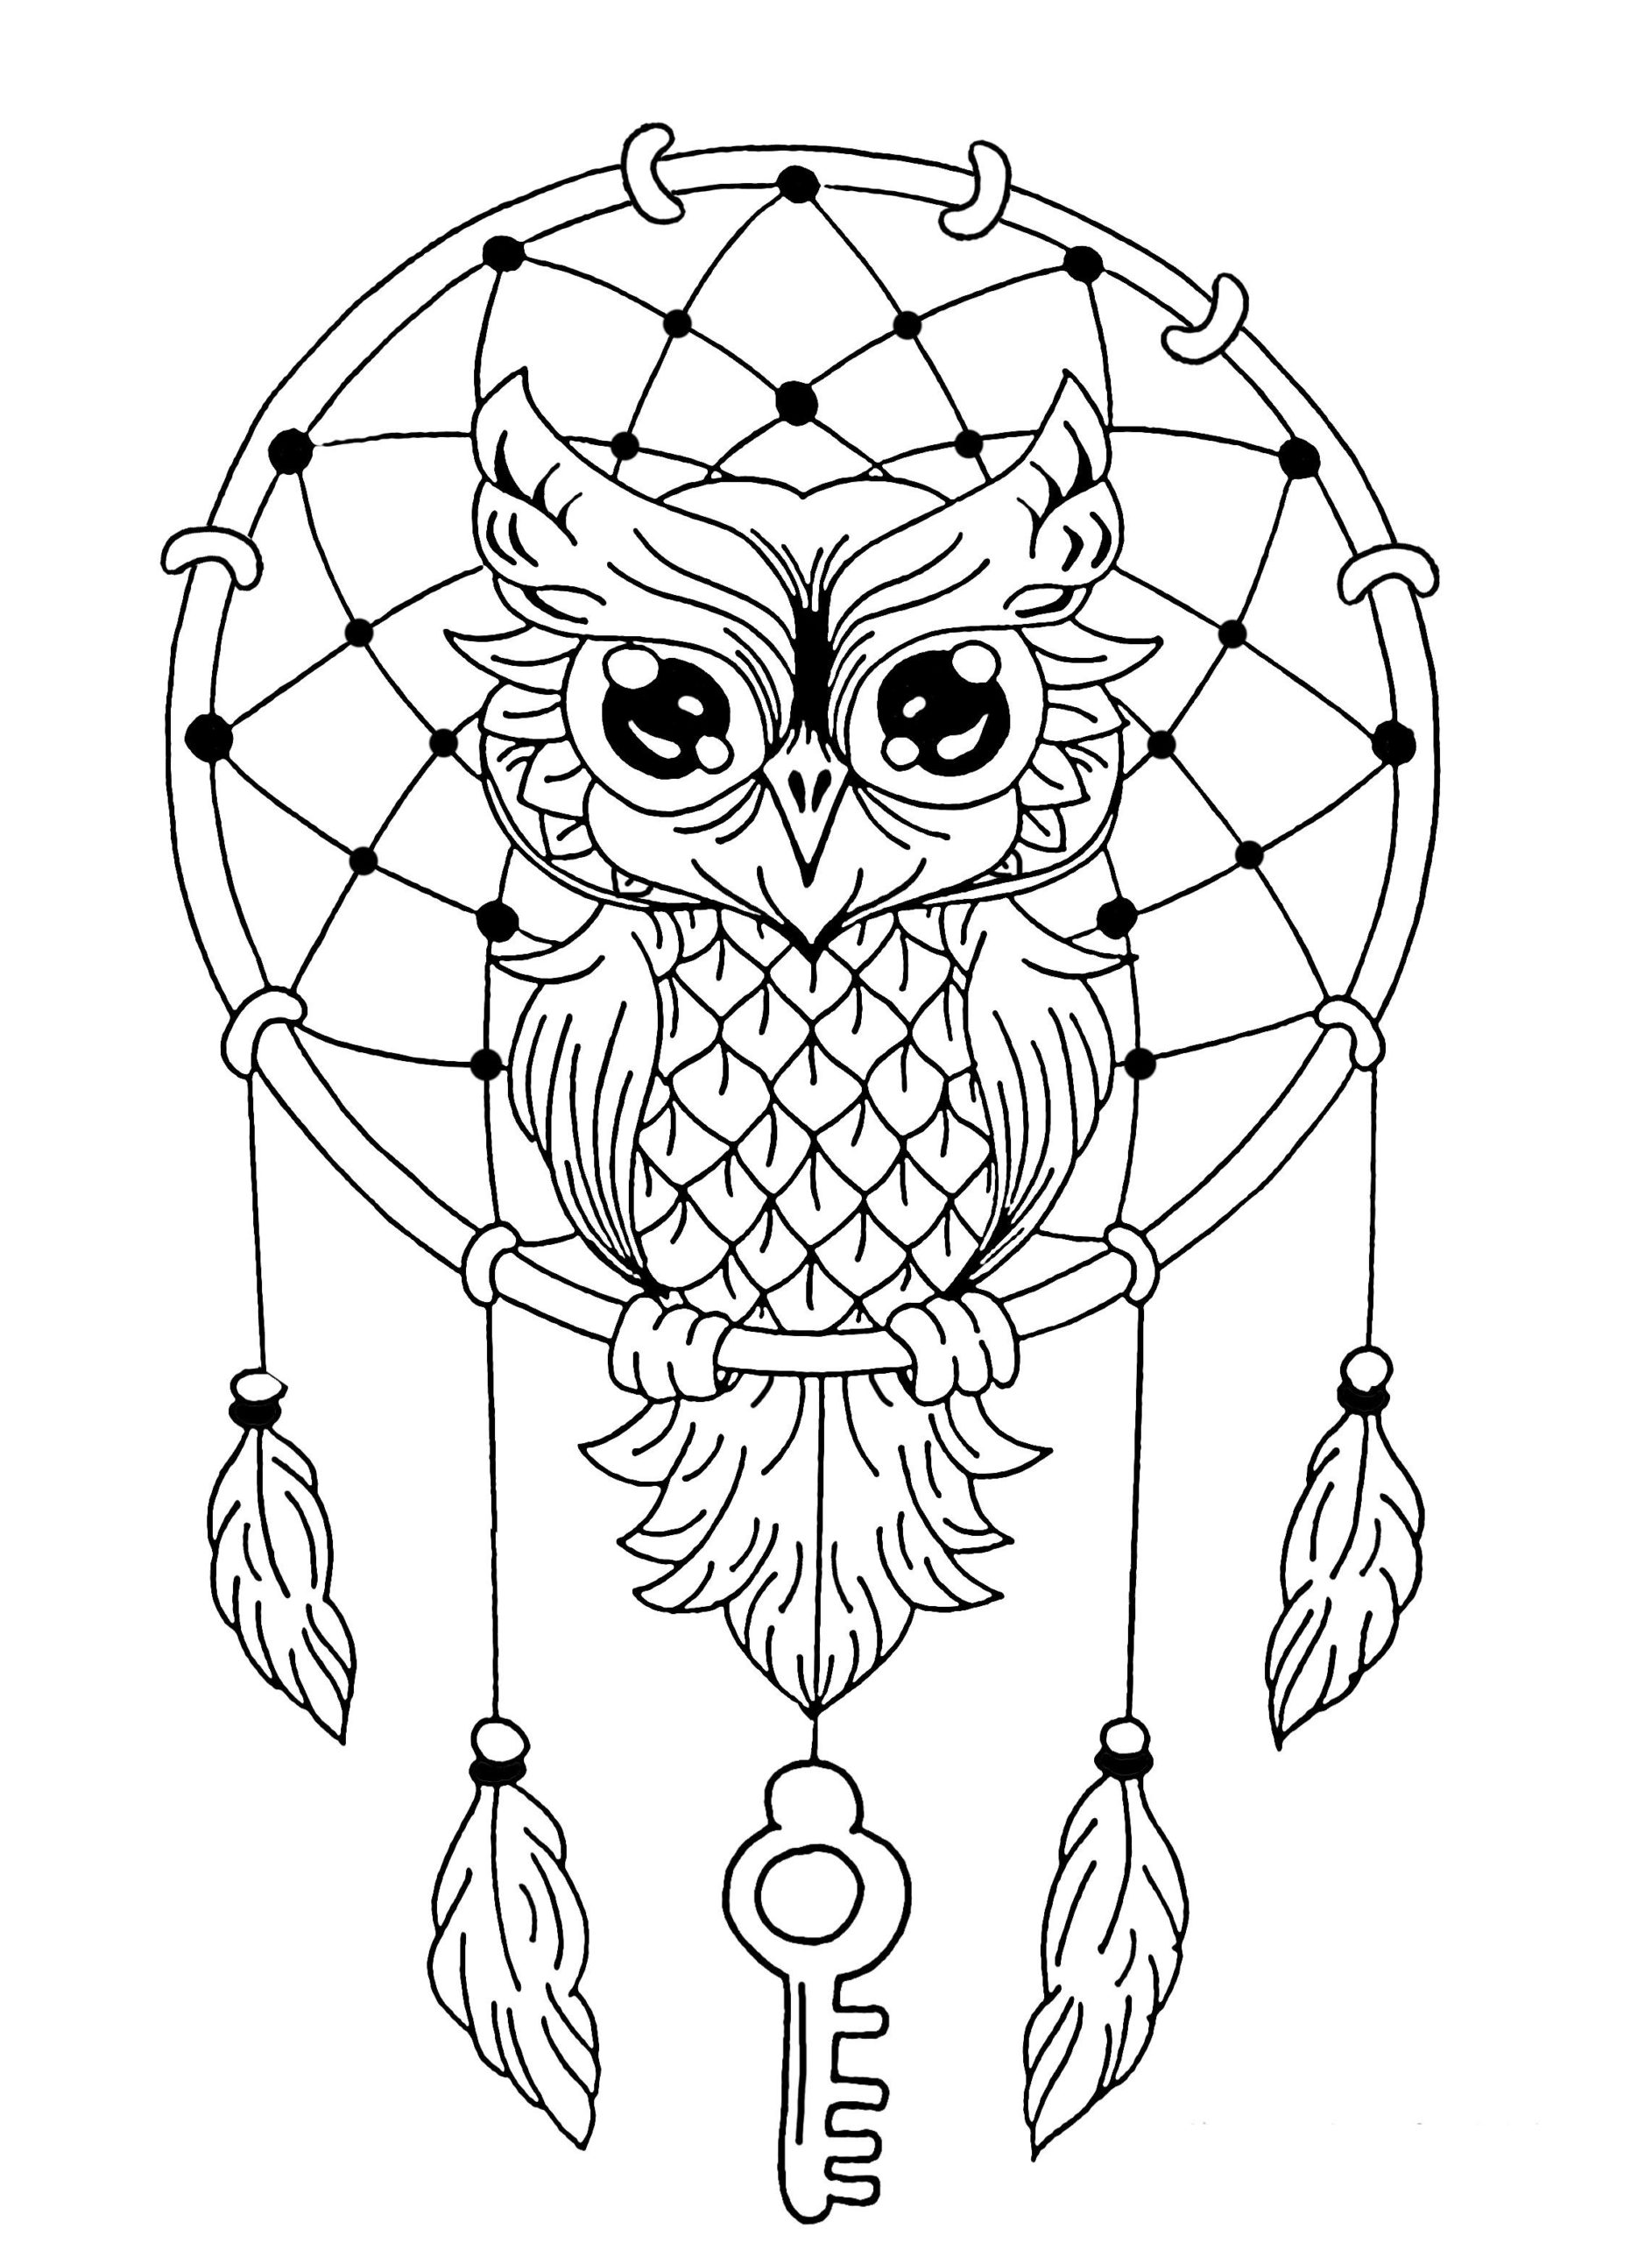 Coloring Pages : Here Are Complex Coloring For Adults Of Animals ...